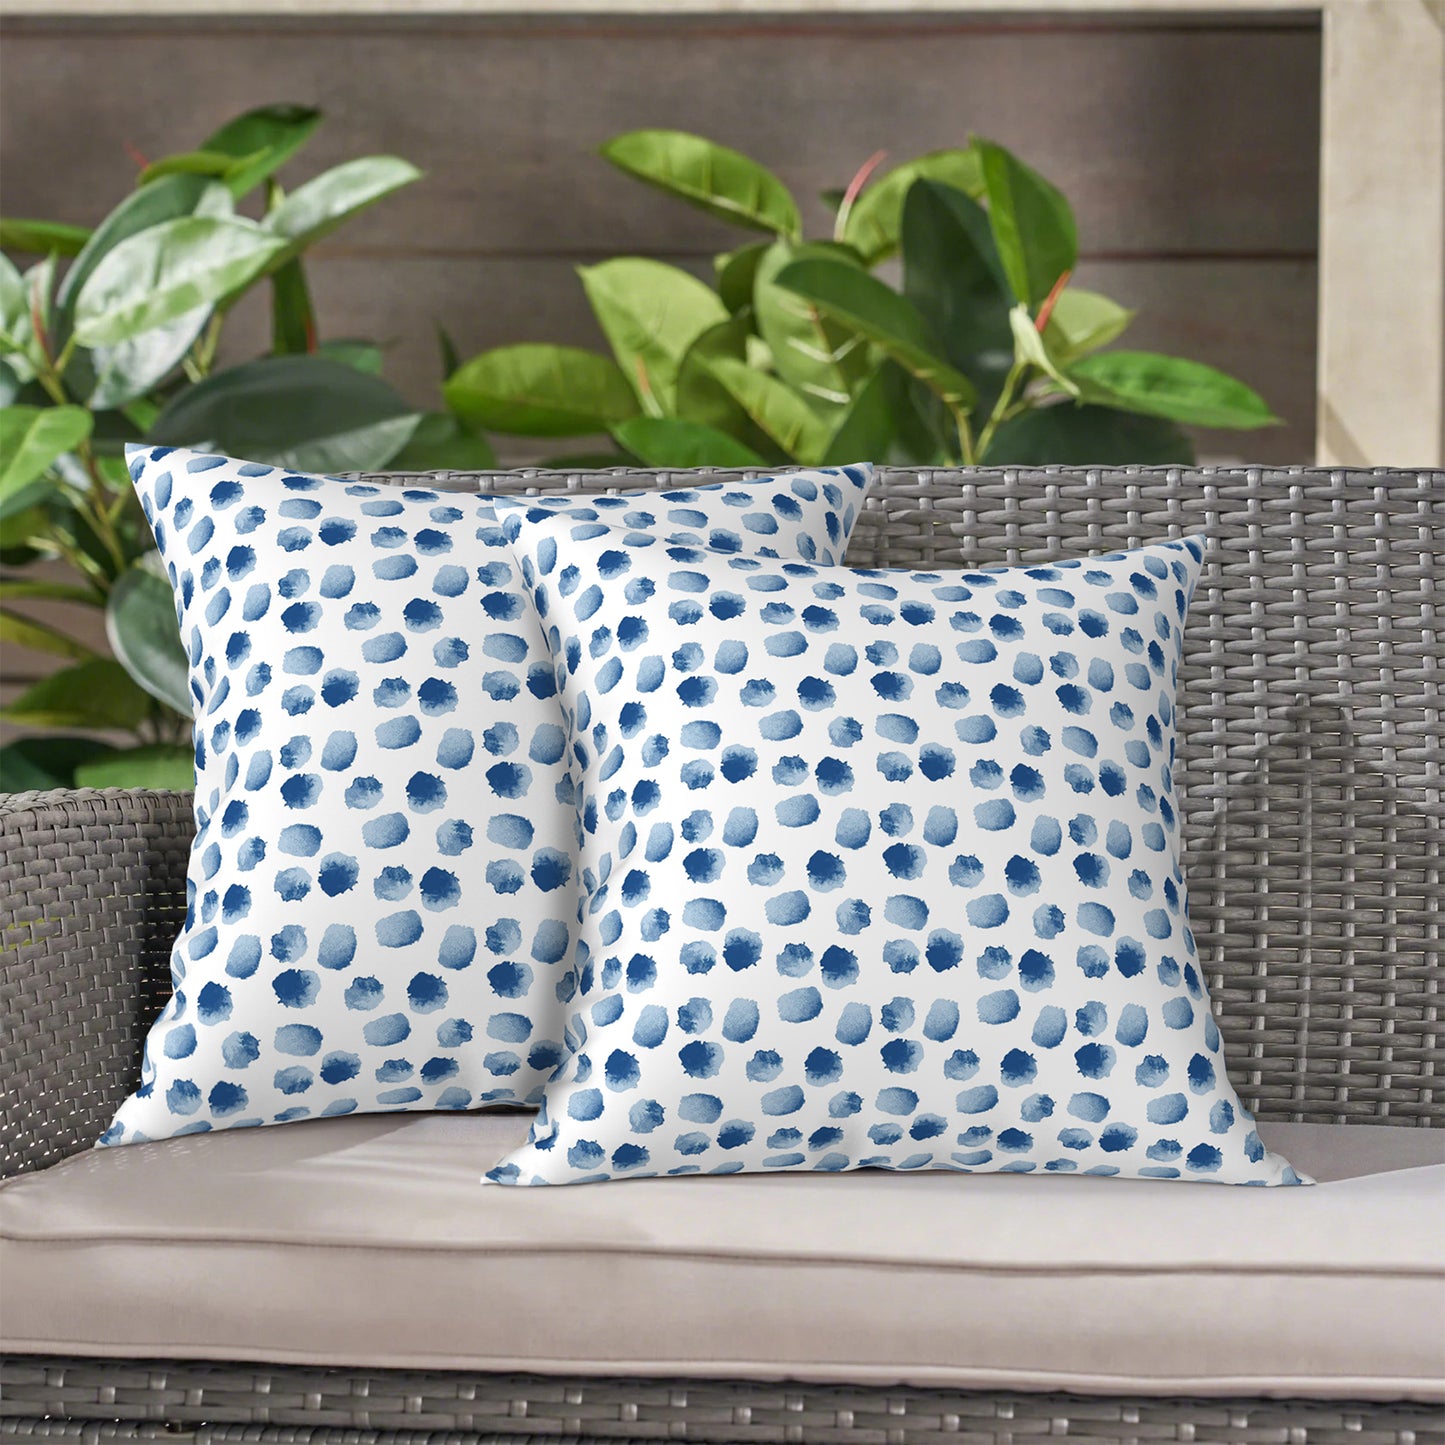 Melody Elephant Outdoor Throw Pillow Covers Pack of 2, Decorative Water Repellent Square Pillow Cases 18x18 Inch, Patio Pillowcases for Home Patio Furniture Use, Brush Blue